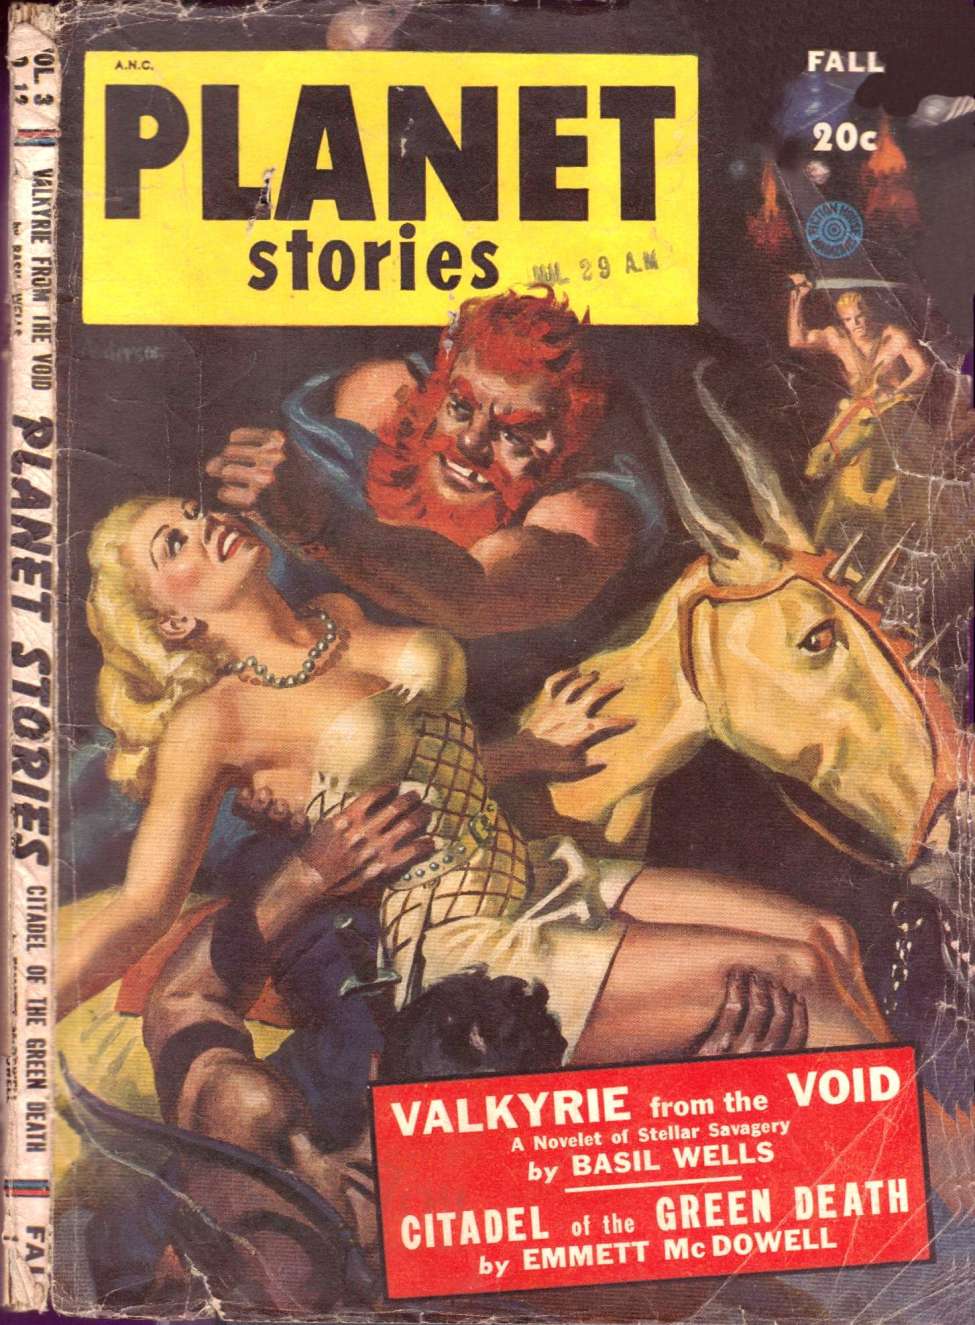 Comic Book Cover For Planet Stories v3 12 - Valkyrie from the Void - Basil Wells